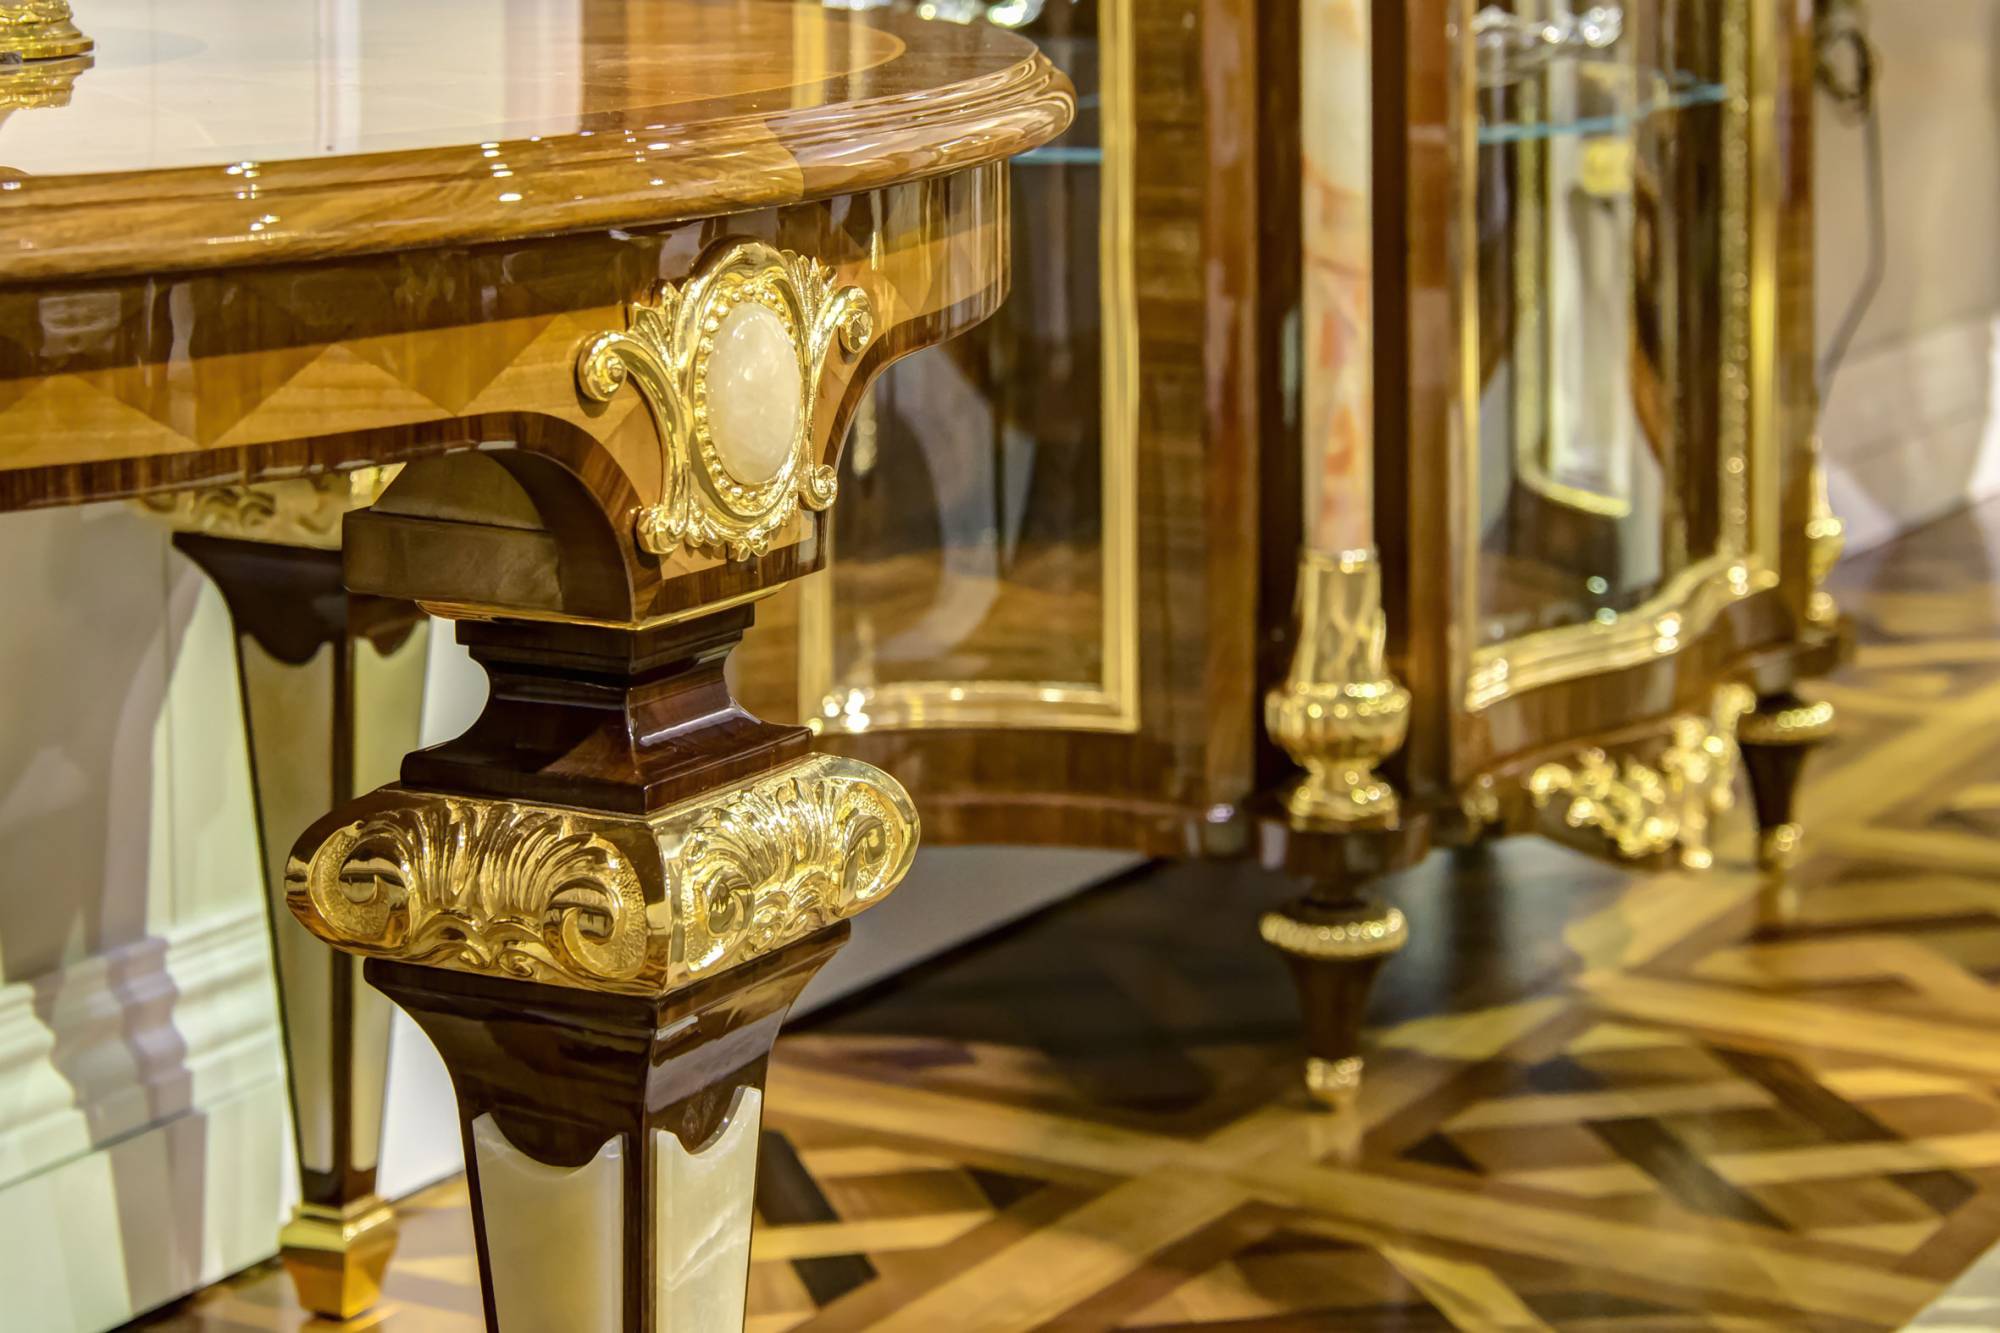 ART. 2071 – The elegance of luxury classic Console made in Italy by C.G. Capelletti.